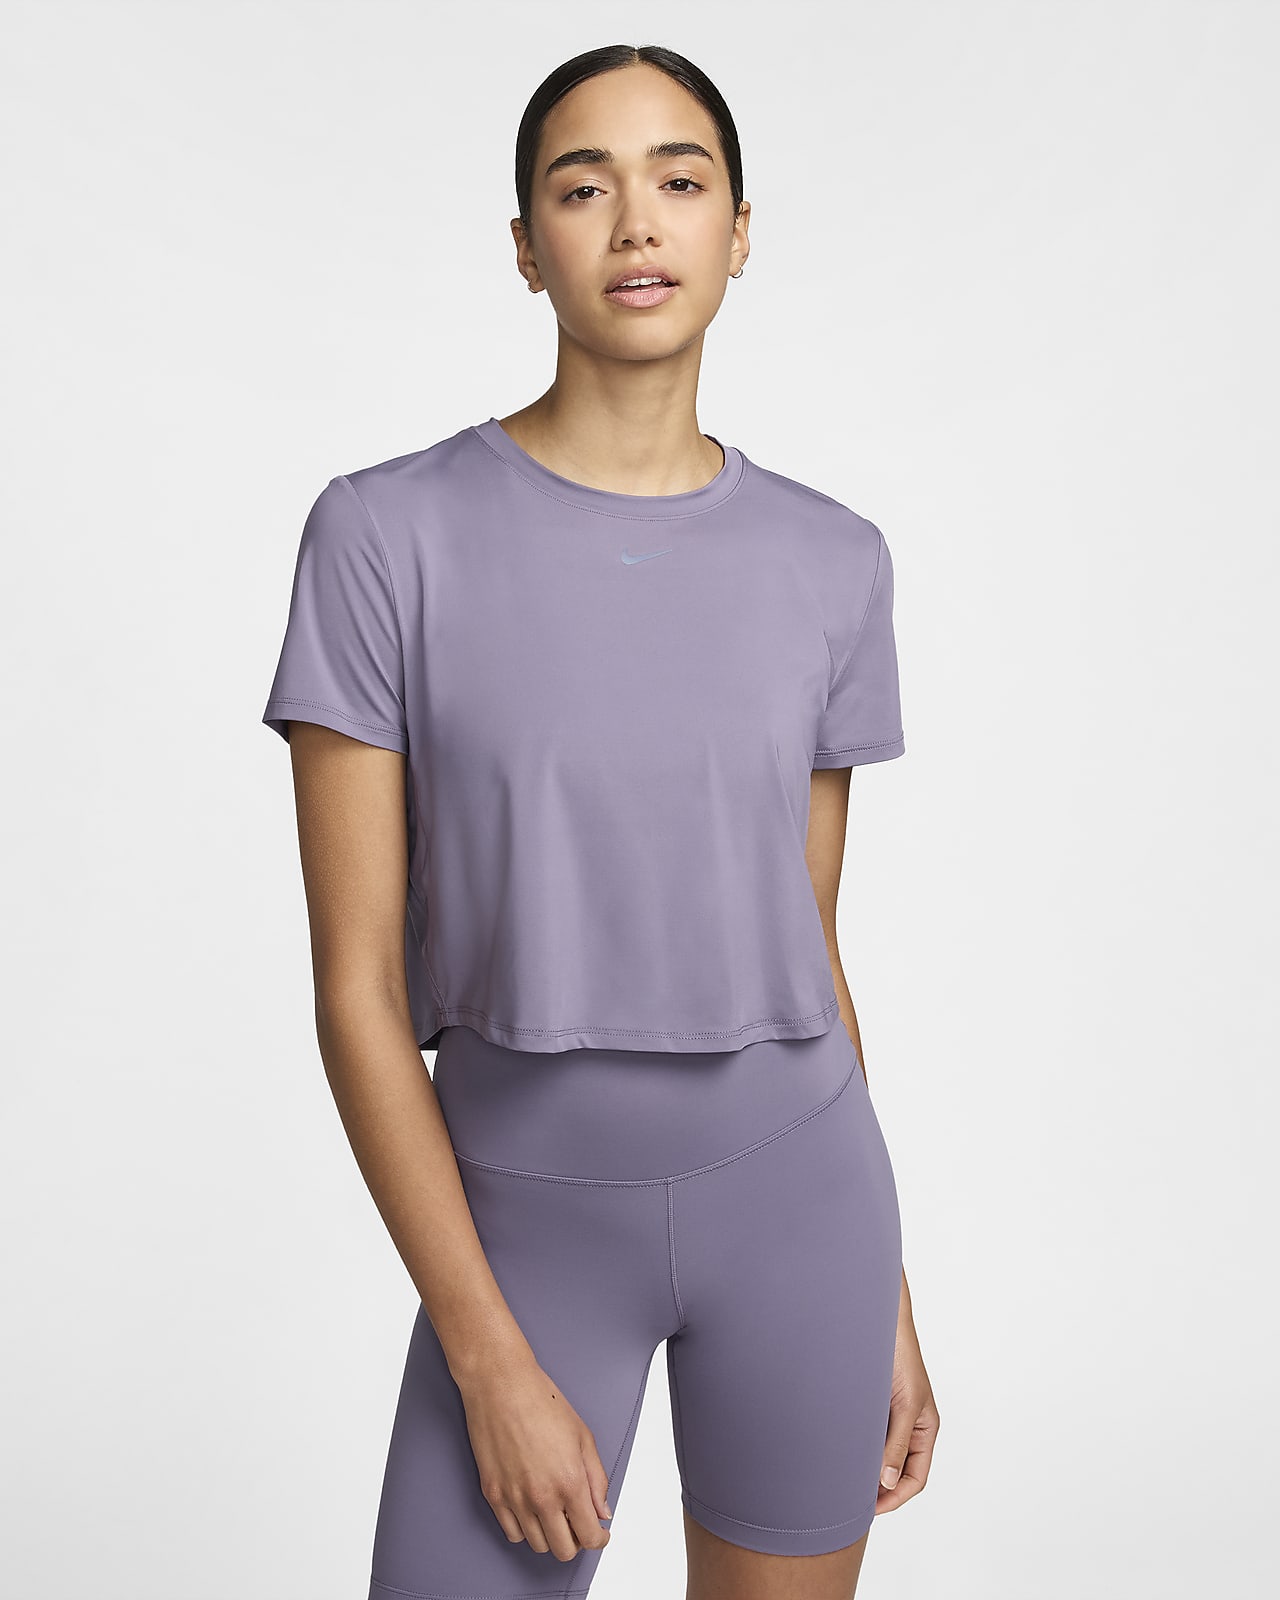 Nike One Classic Women's Dri-FIT Short-Sleeve Cropped Top